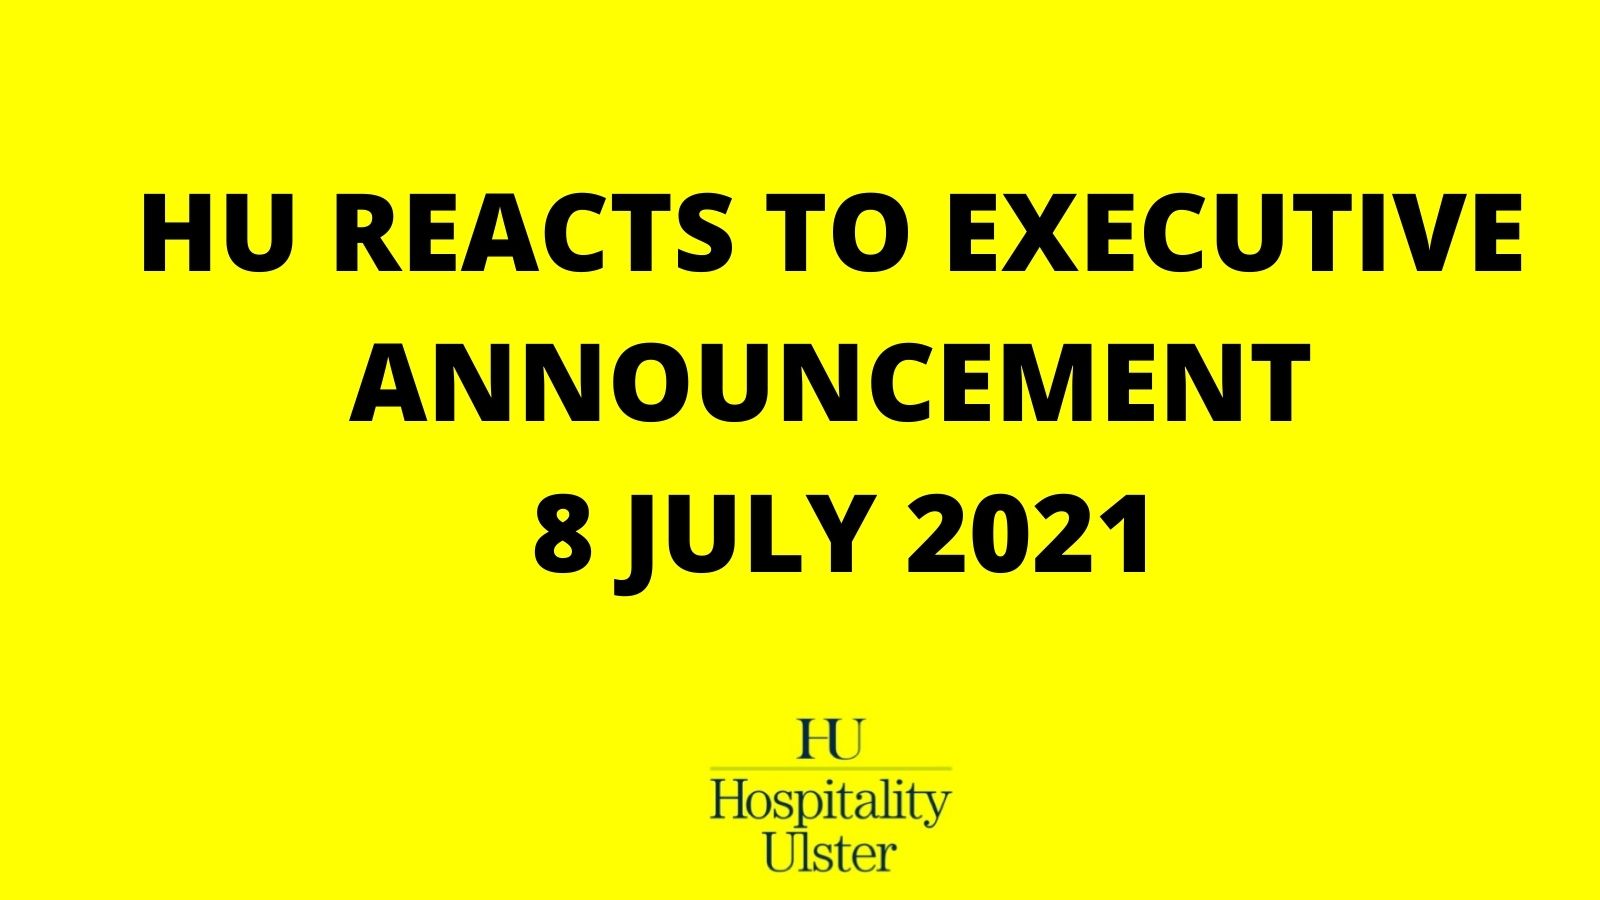  HU STATEMENT FOLLOWING EXECUTIVE ANNOUNCEMENT ON RESTRICITIONS - 8 JULY